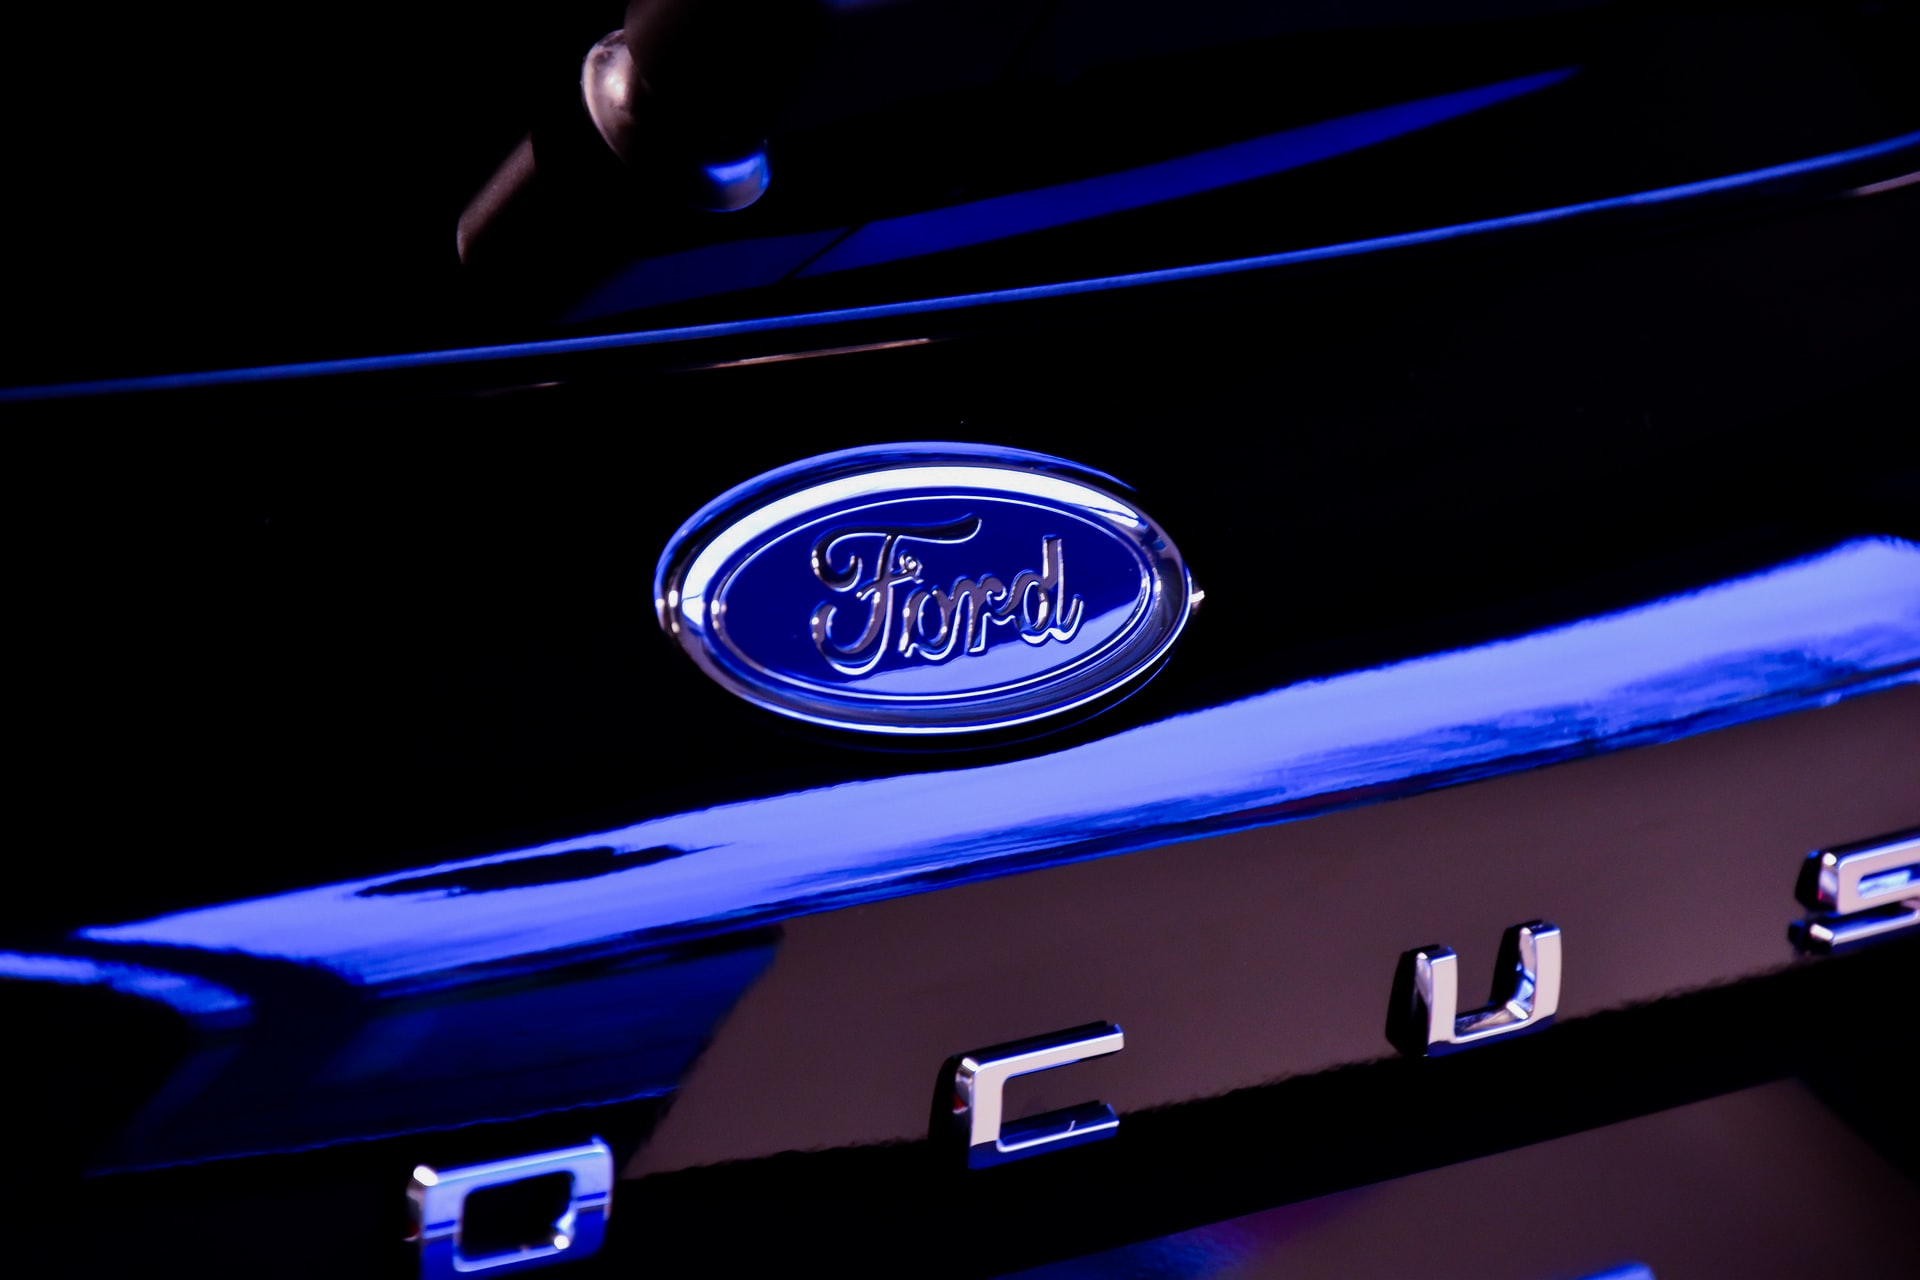 Ford recalled almost 3 million US vehicles